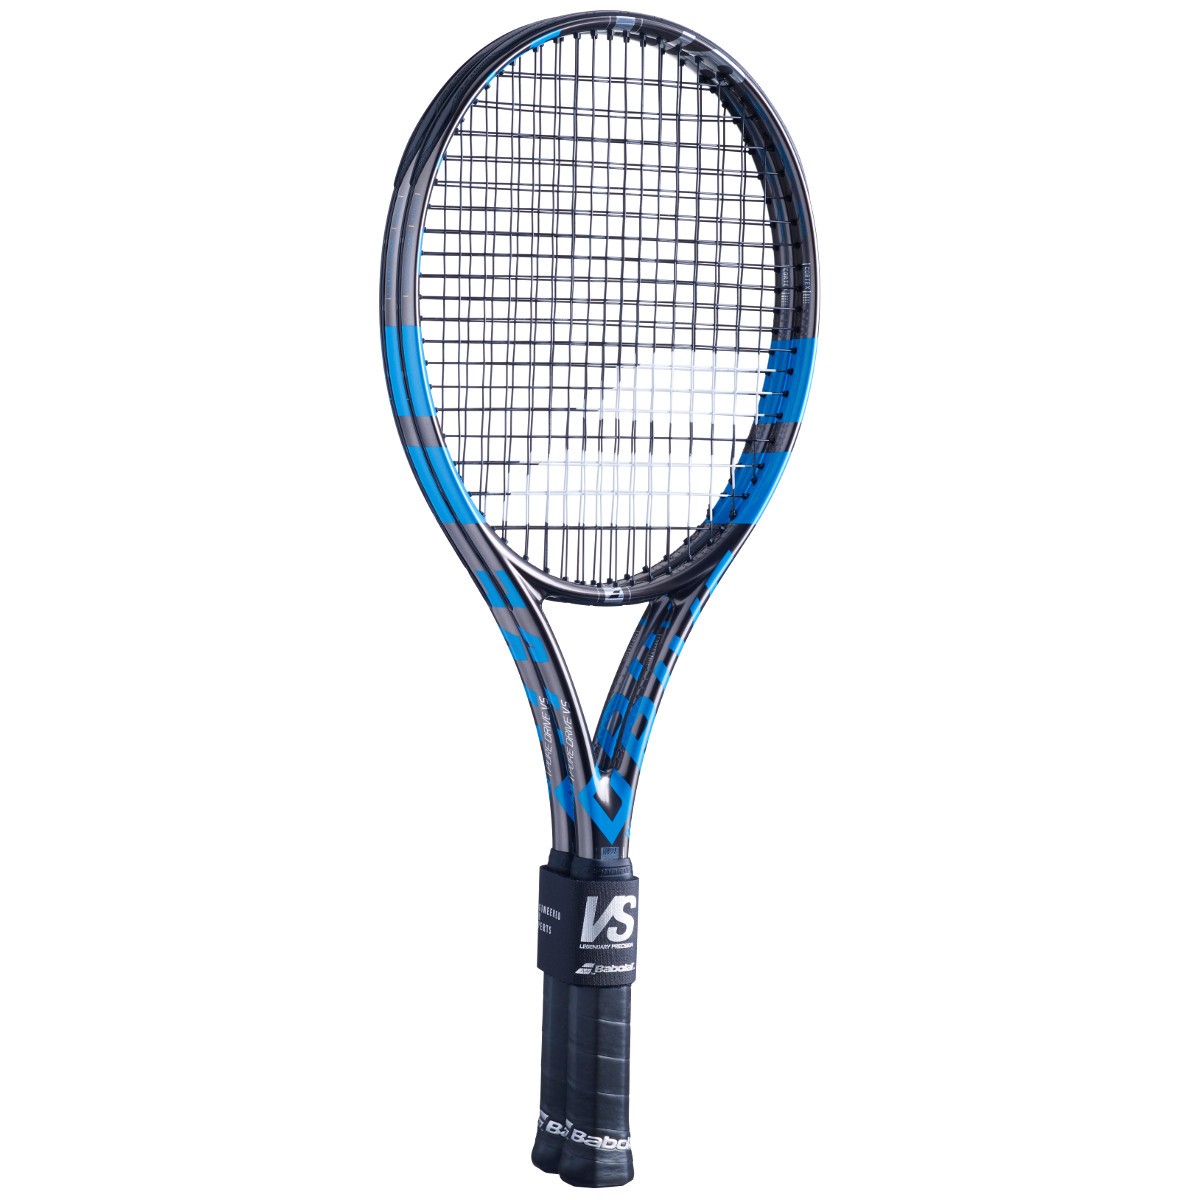 PACK OF 2 BABOLAT PURE DRIVE VS (300 GR) RACQUETS - BABOLAT